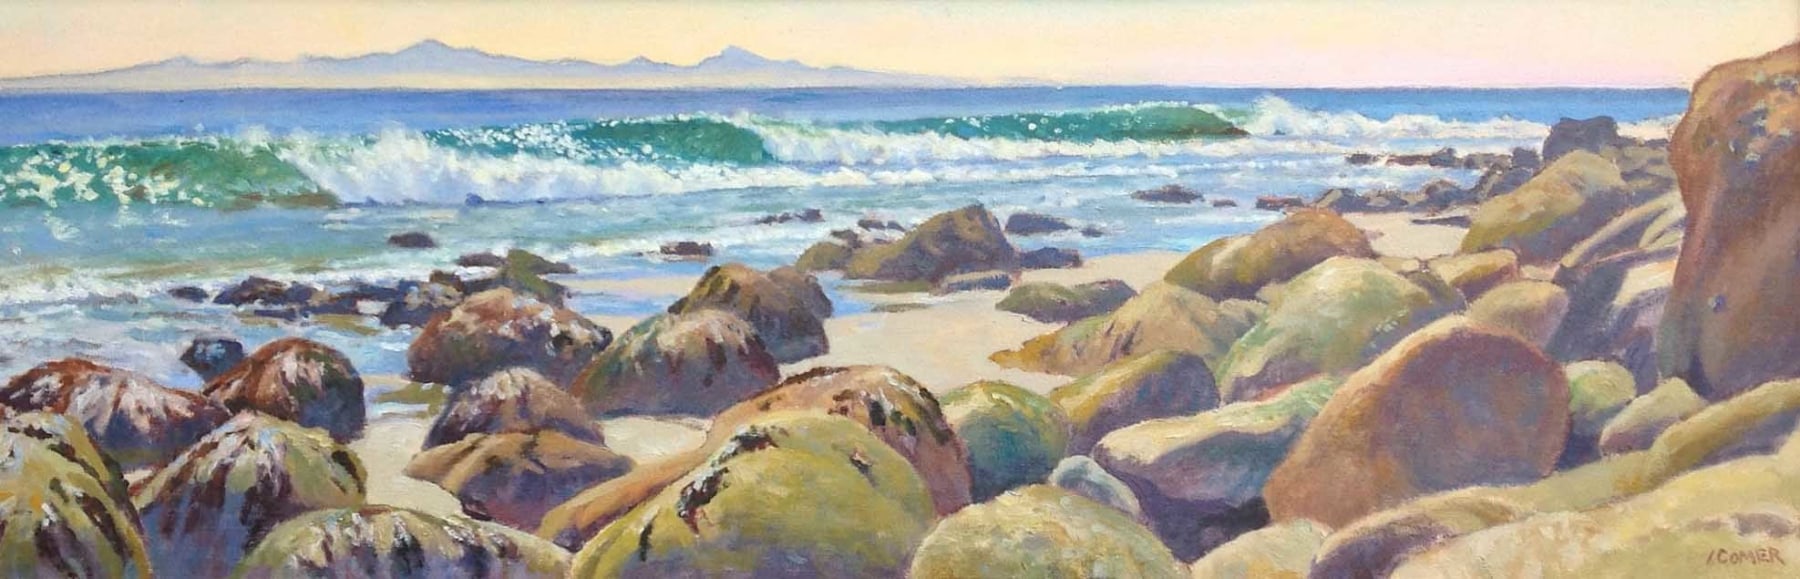 JOHN COMER , Low Tide On A Point,